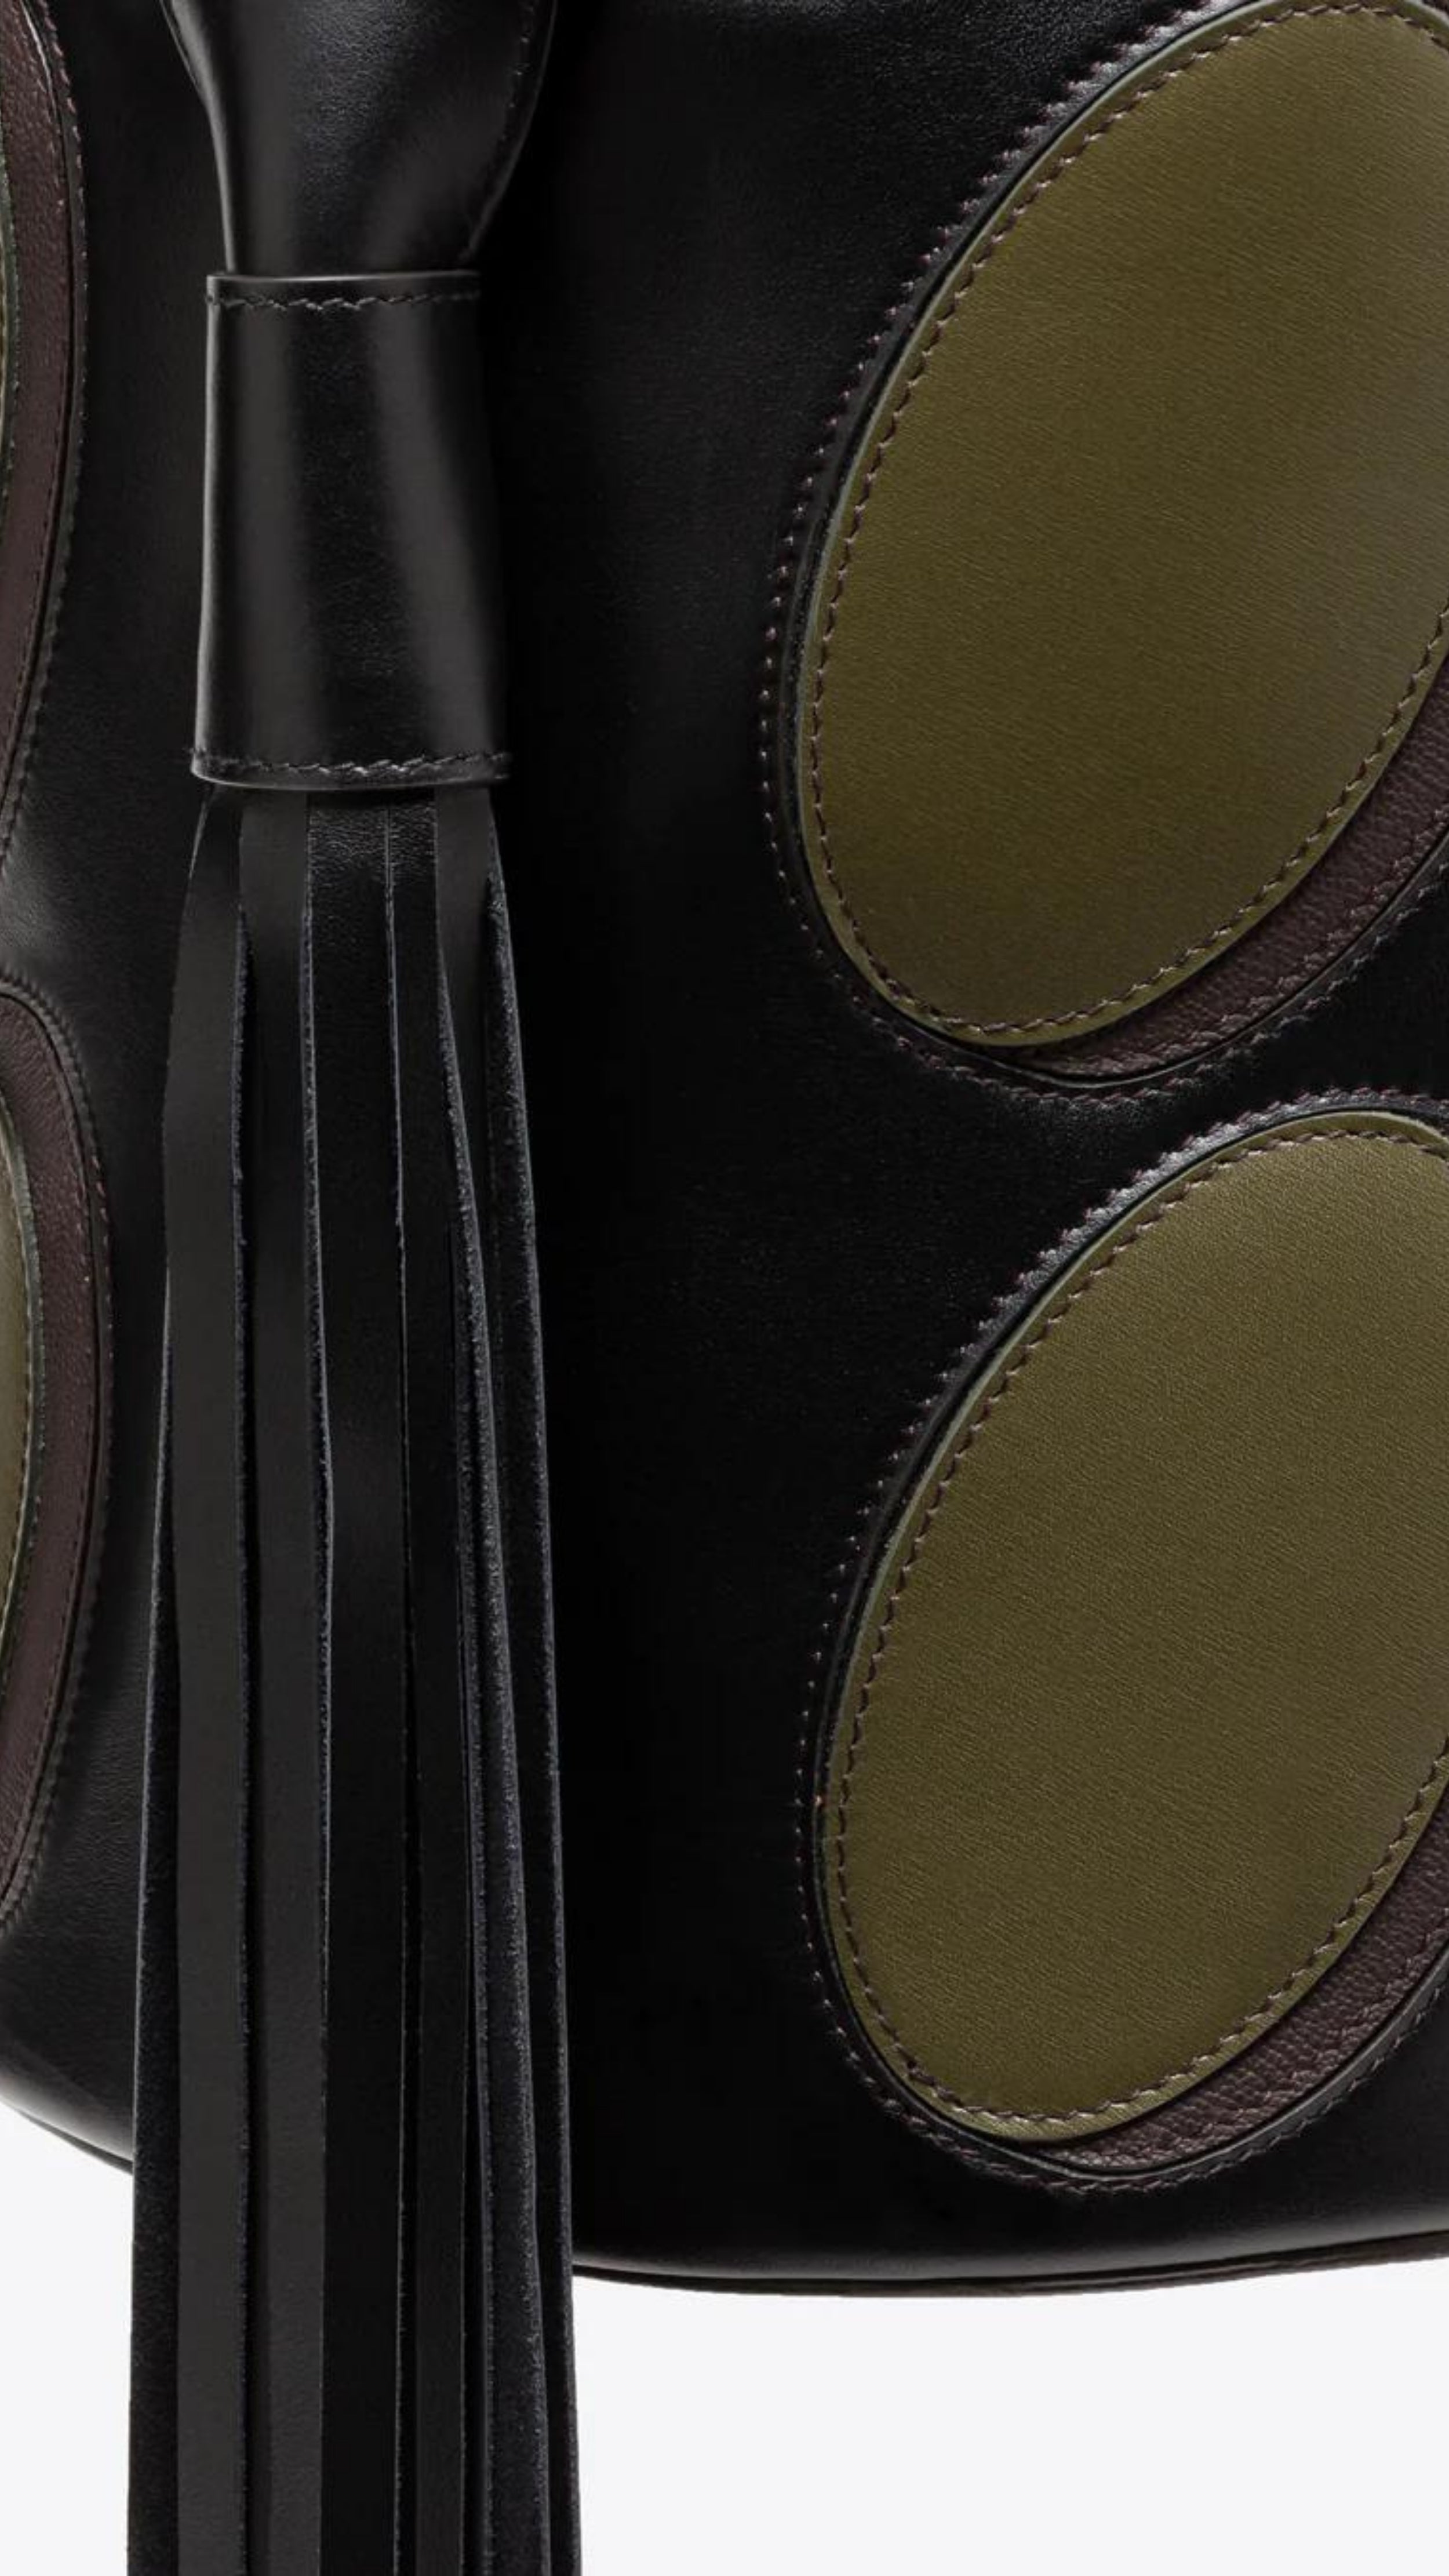 AZ Factory Colville Molly Molloy Lucinda Chambers,  Leather Patchwork Midi Bucket Bag.. Black oval bucket back in black leather with olive green ovals patches. Has an adjustable black handle and a dramatic oversize black leather tassel. Close up of oval olive green leather patchwork and tassel.